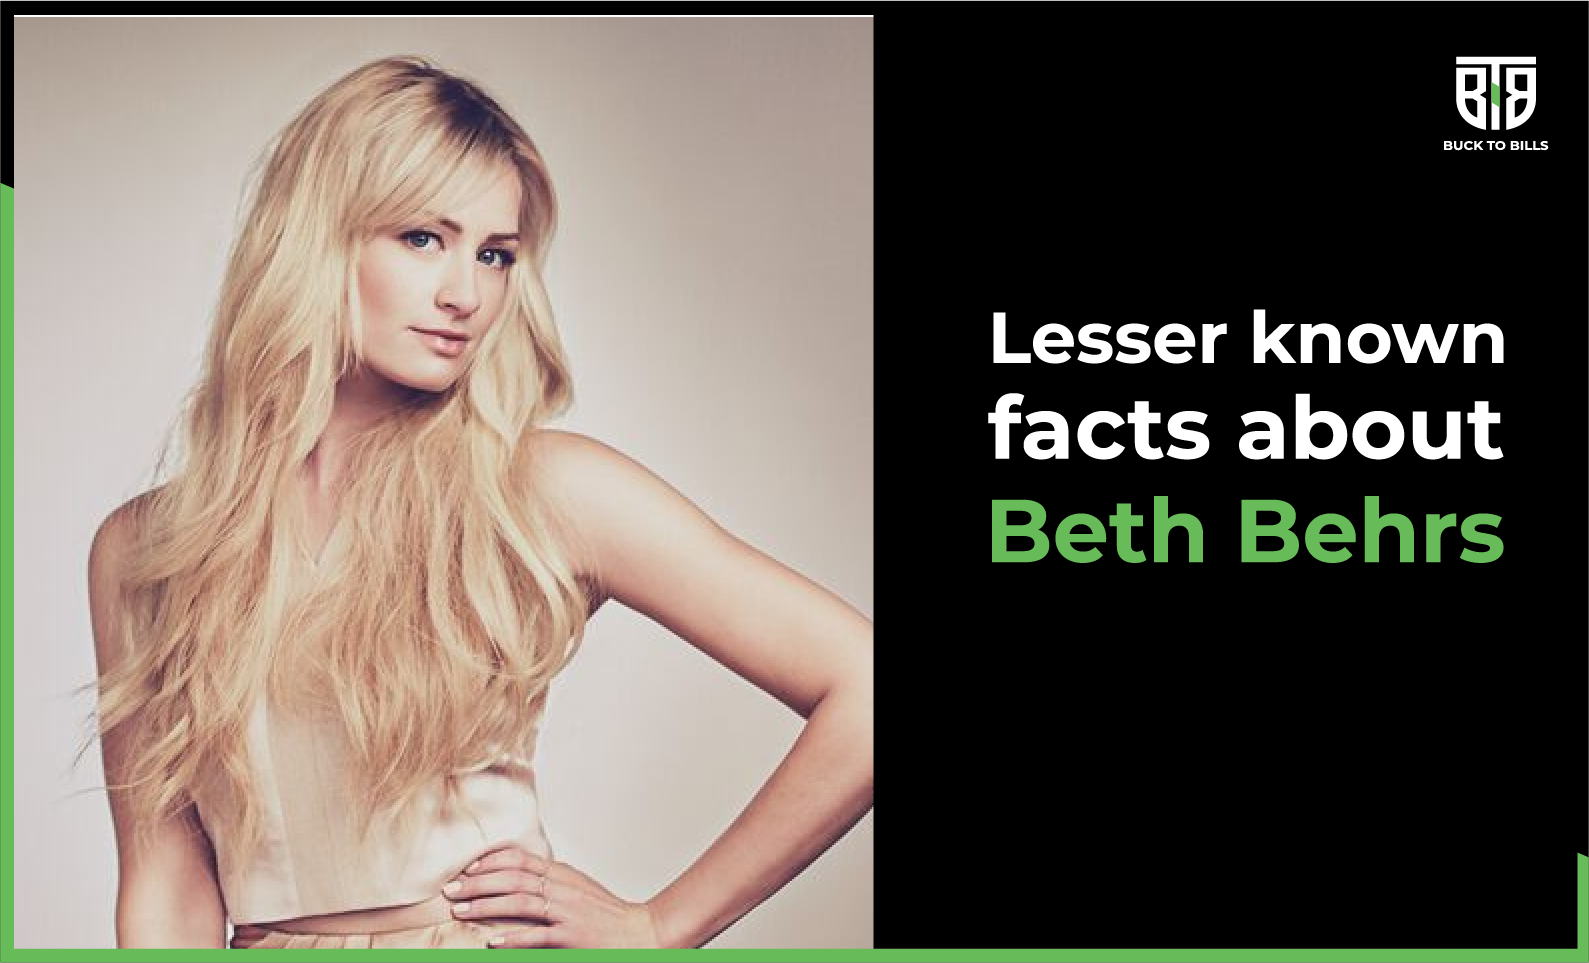 Beth Behrs and the lesser-known facts about her